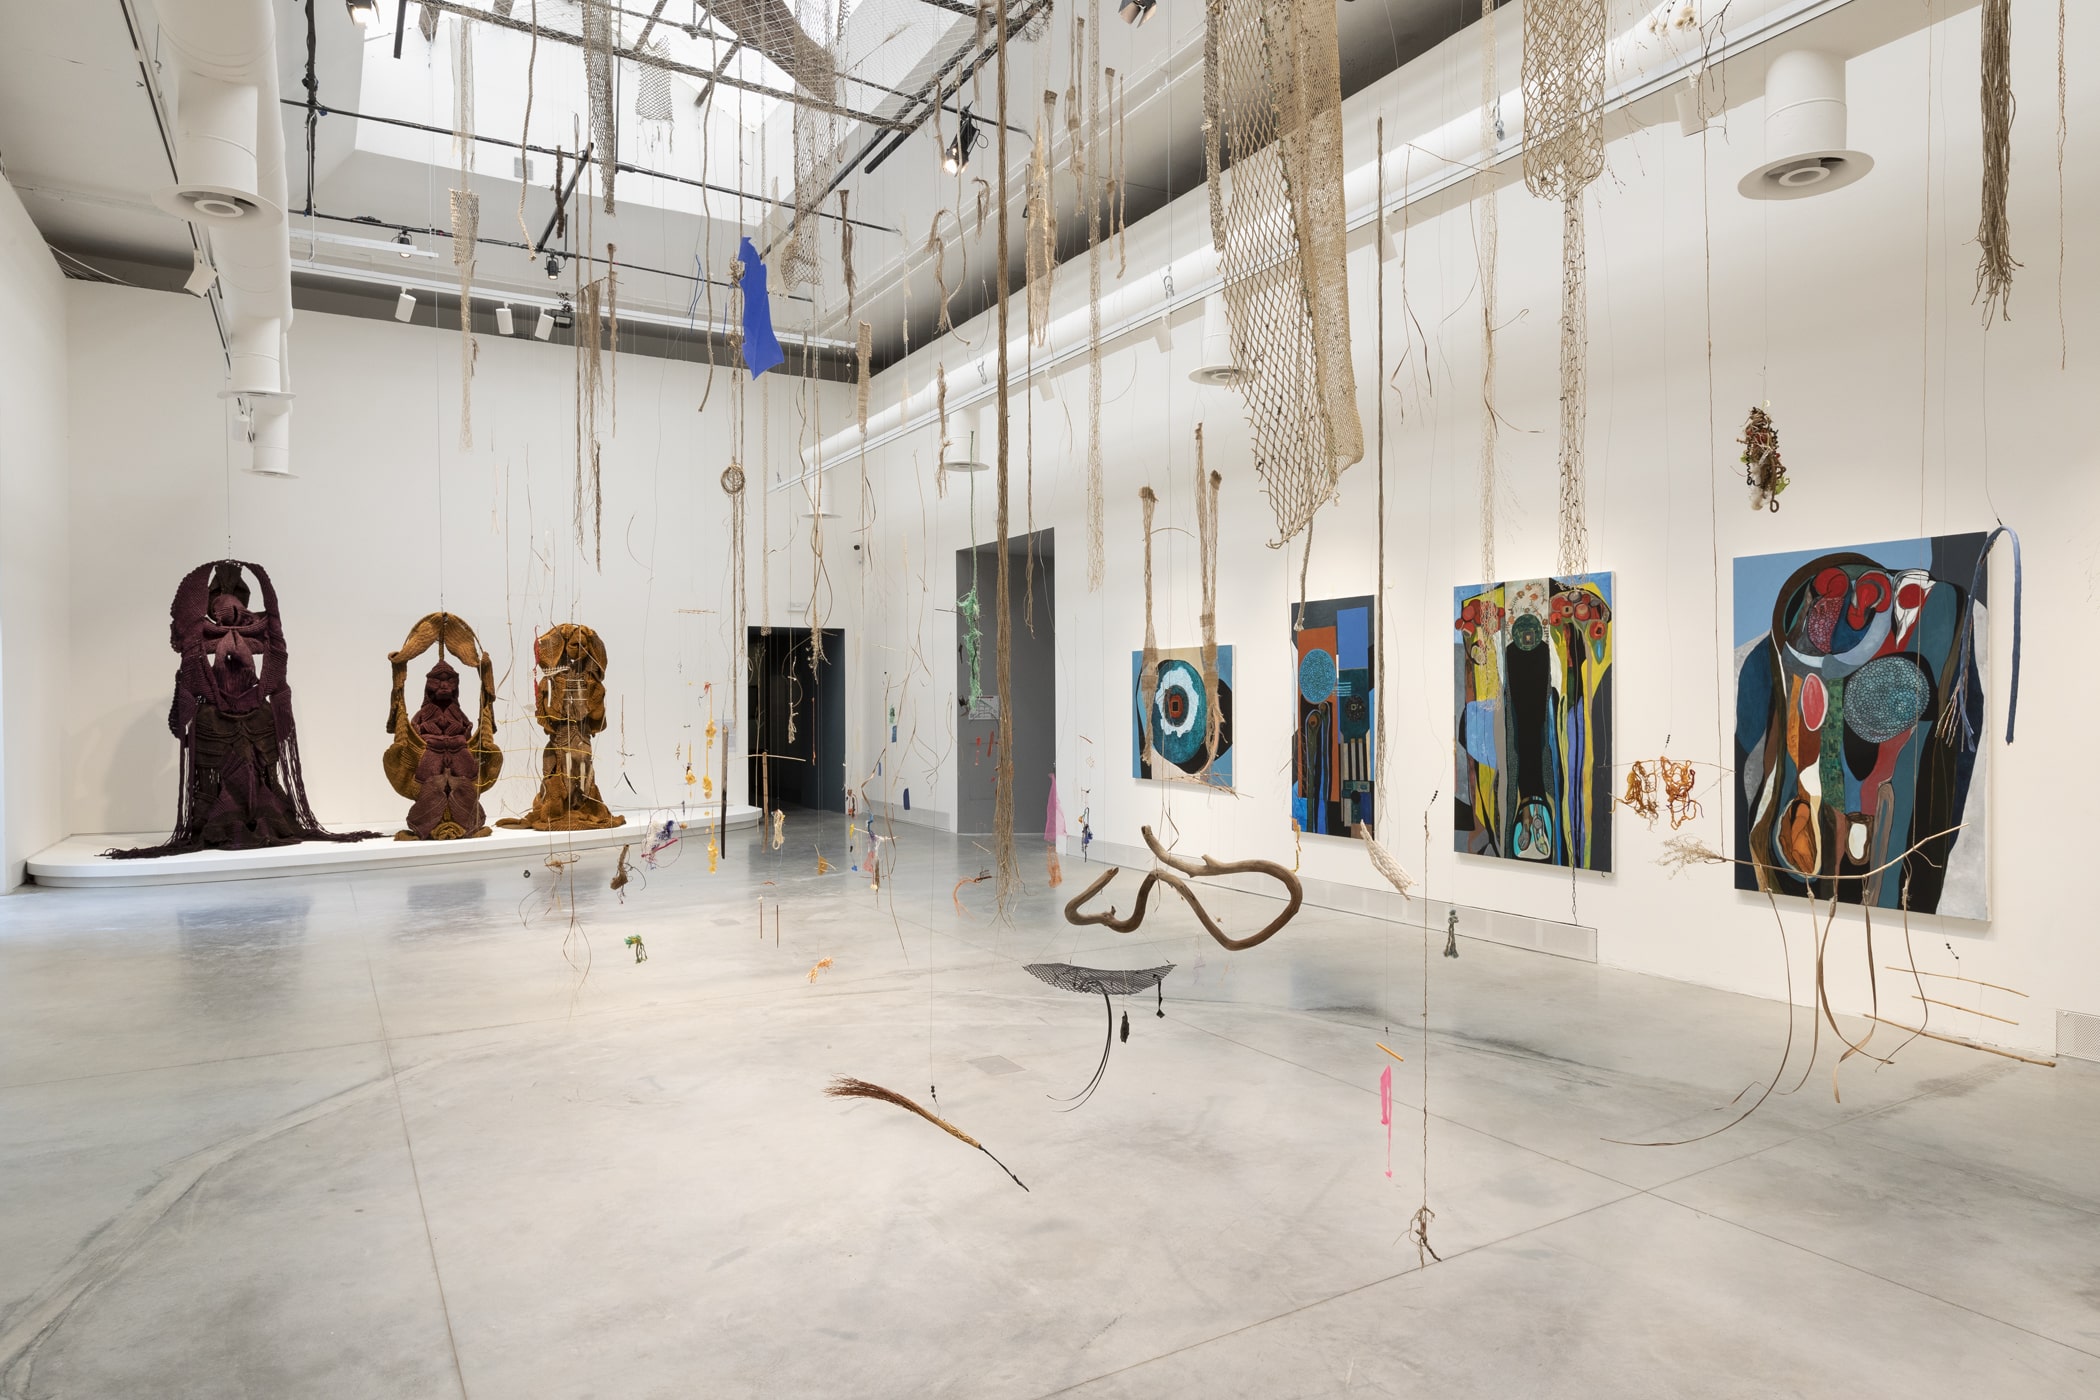 Installation view, "The Milk of Dreams"